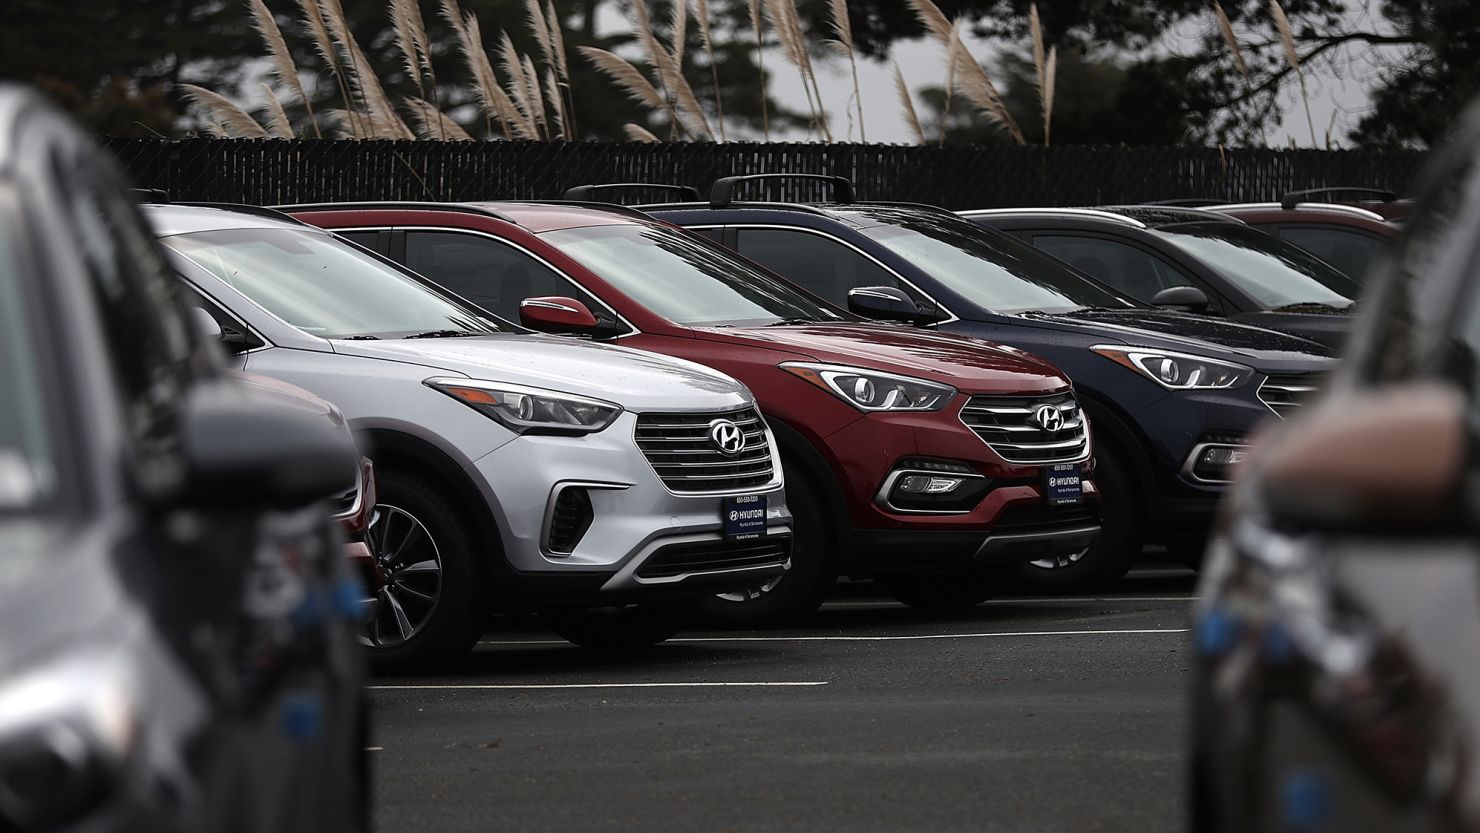 2015-2019 Hyundai and Kia models, such as the Hyundai Santa Fe, are roughly twice as likely to be stolen as other vehicles of a similar age.